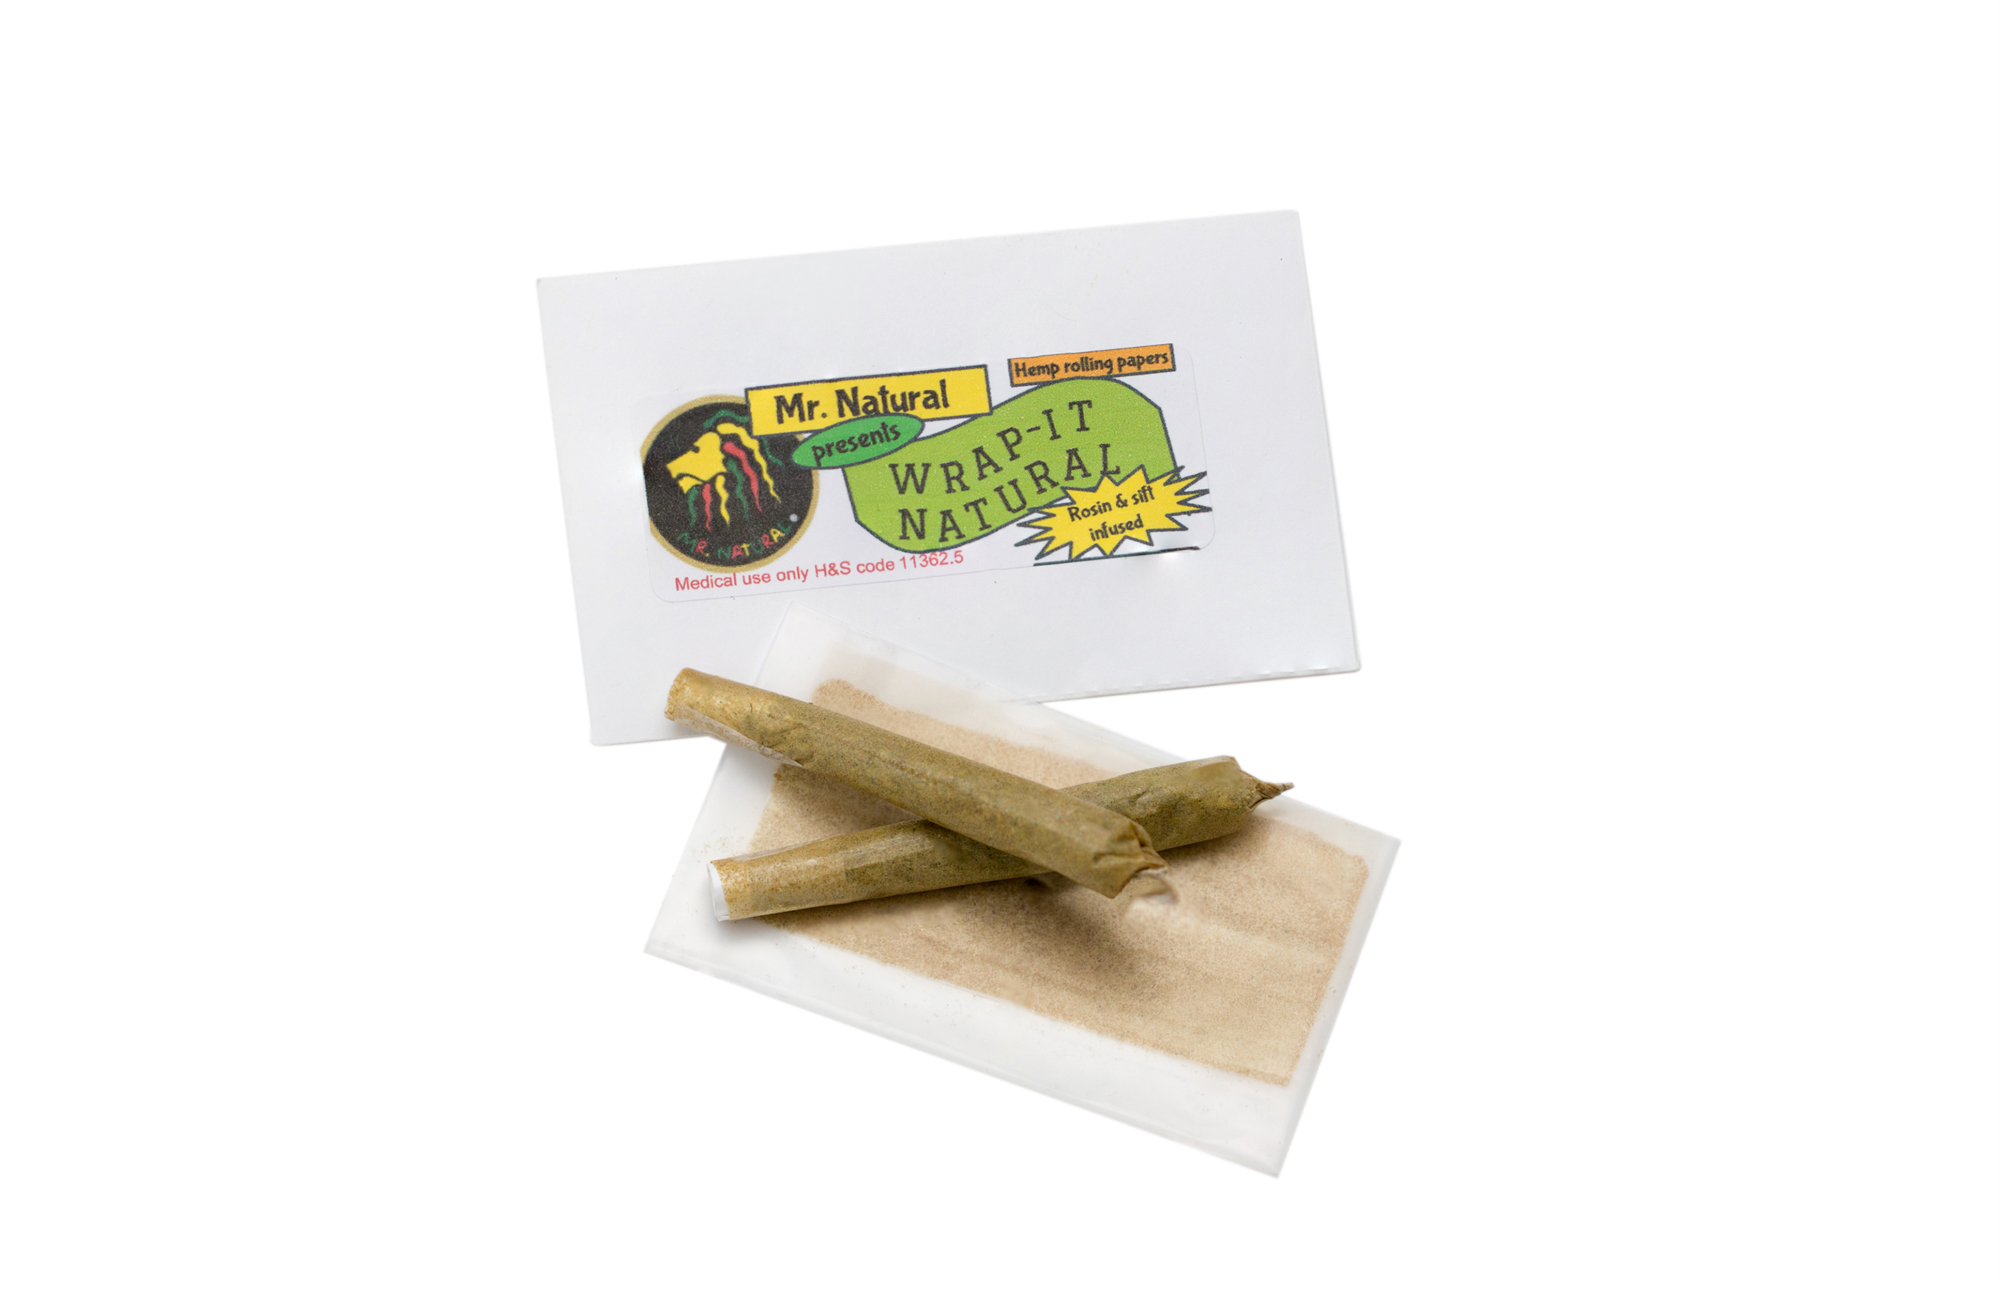 Mr. Natural - Hemp rolling papers - wrap it natural